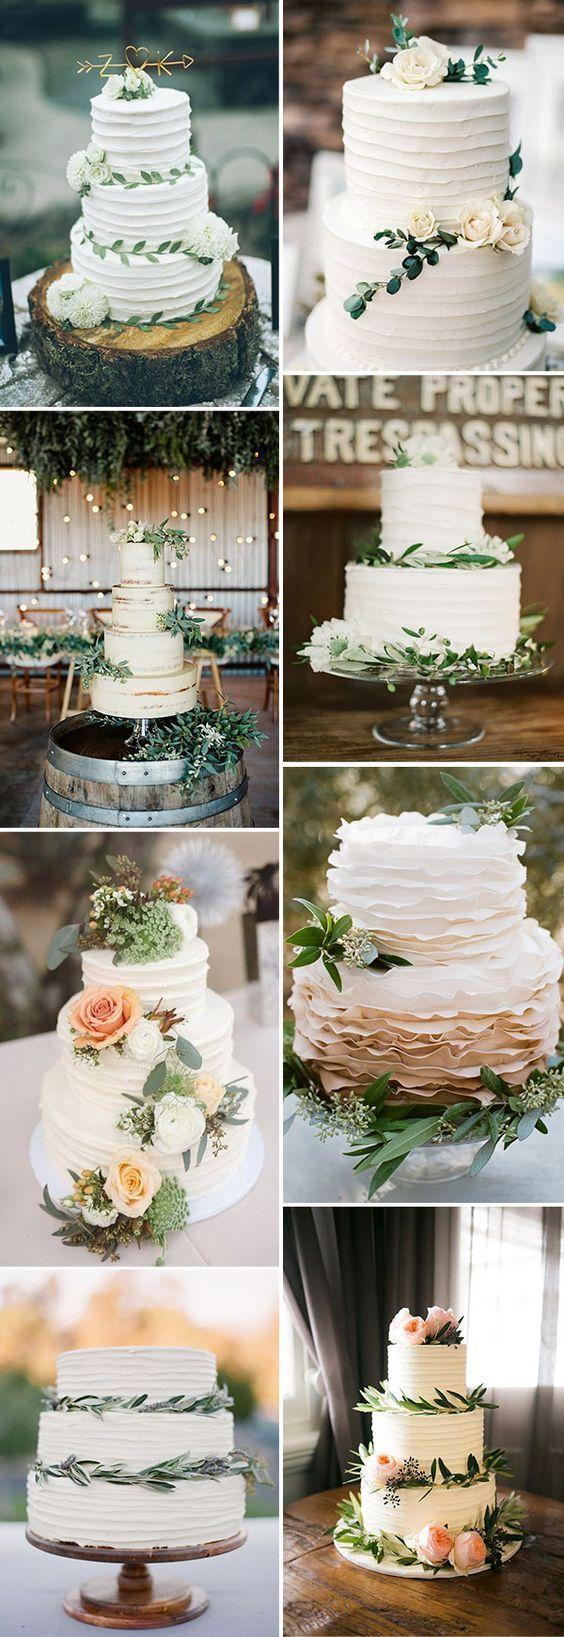 Hochzeit - 50 Steal-Worthy Wedding Cake Ideas For Your Special Day